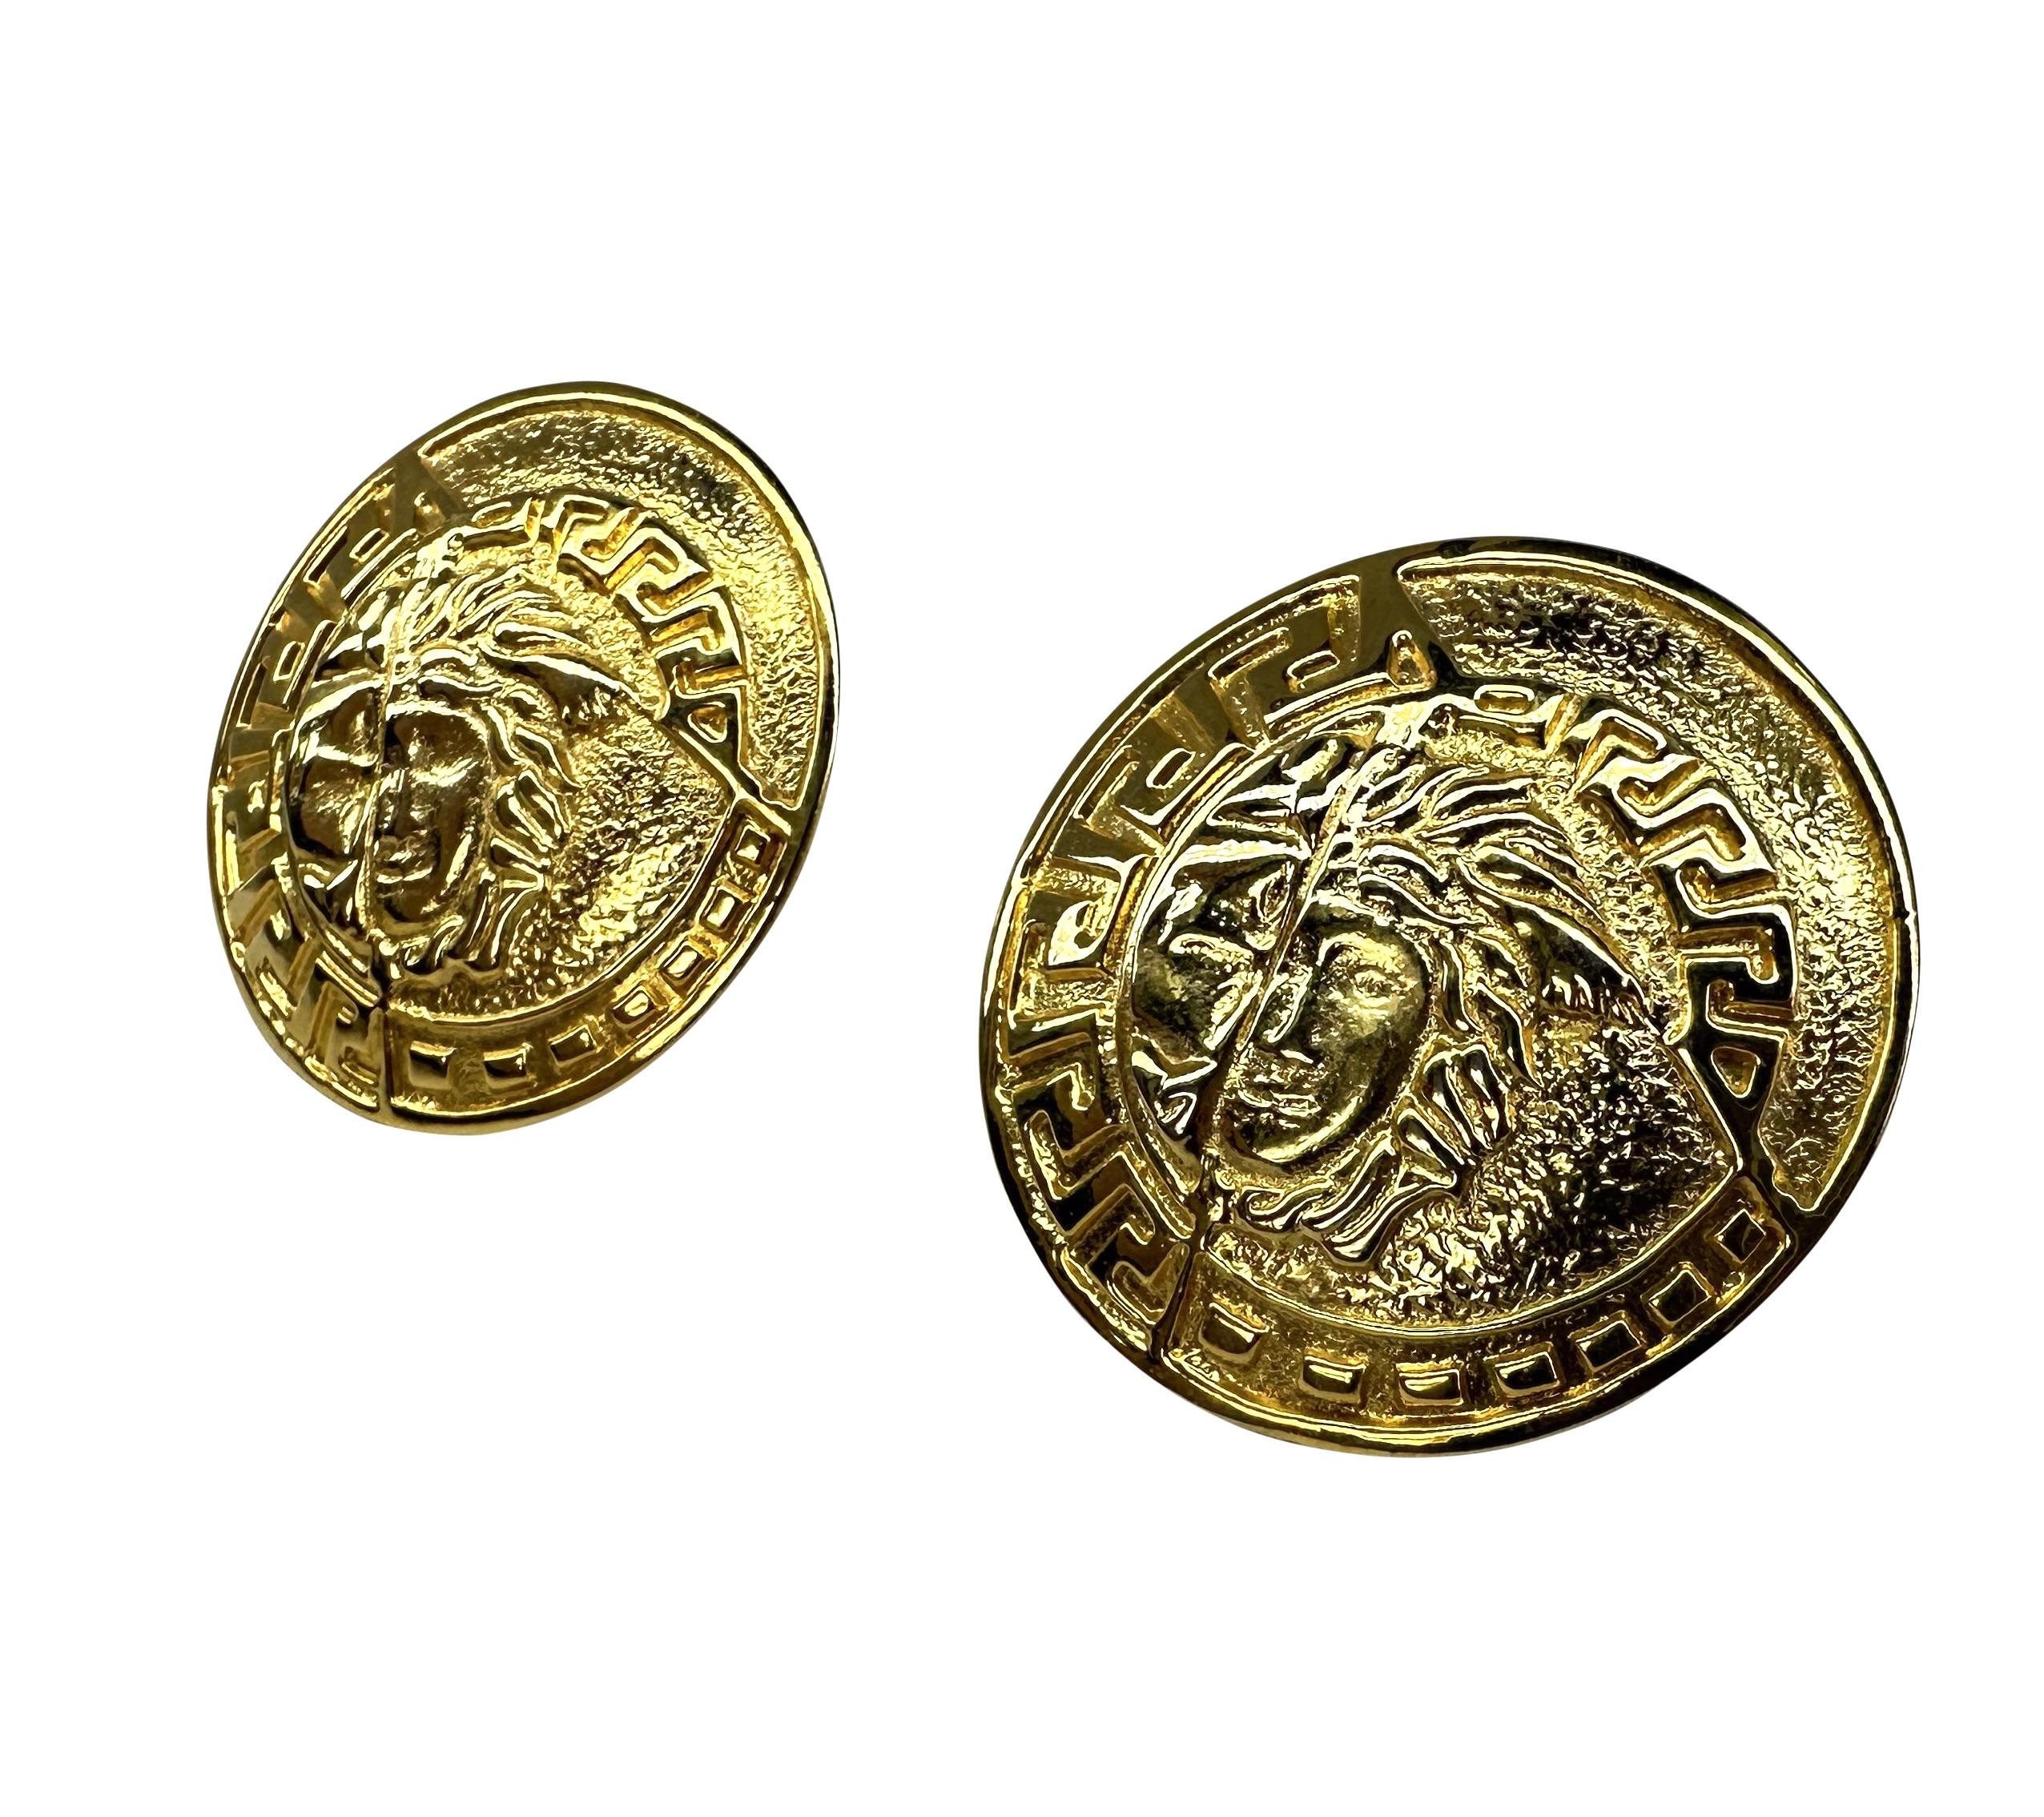 Presenting a pair of large gold-tone Gianni Versace Medusa clip-on earrings, designed by Gianni Versace. From the 1990s, these fabulous large circular earrings feature a Greek key border and are made complete with a large Versace Medusa